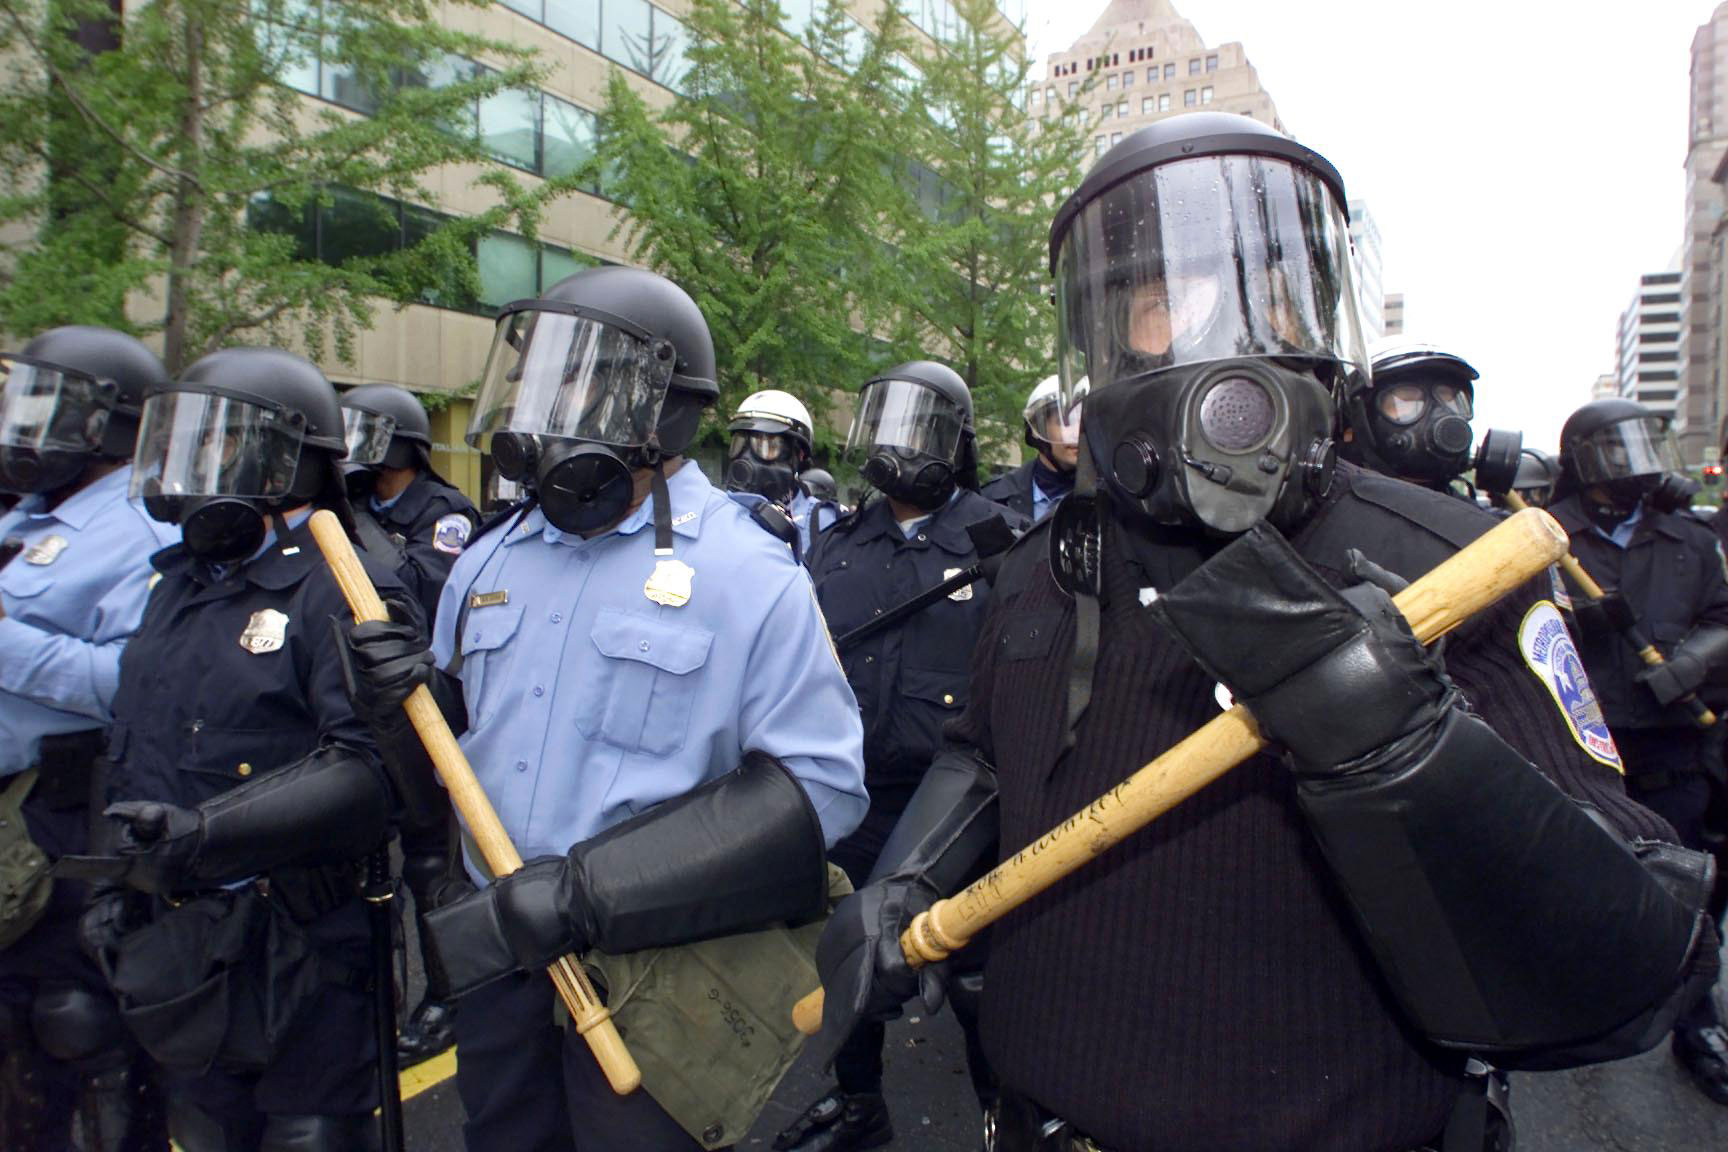 Washington police officers in riot gear stand watc